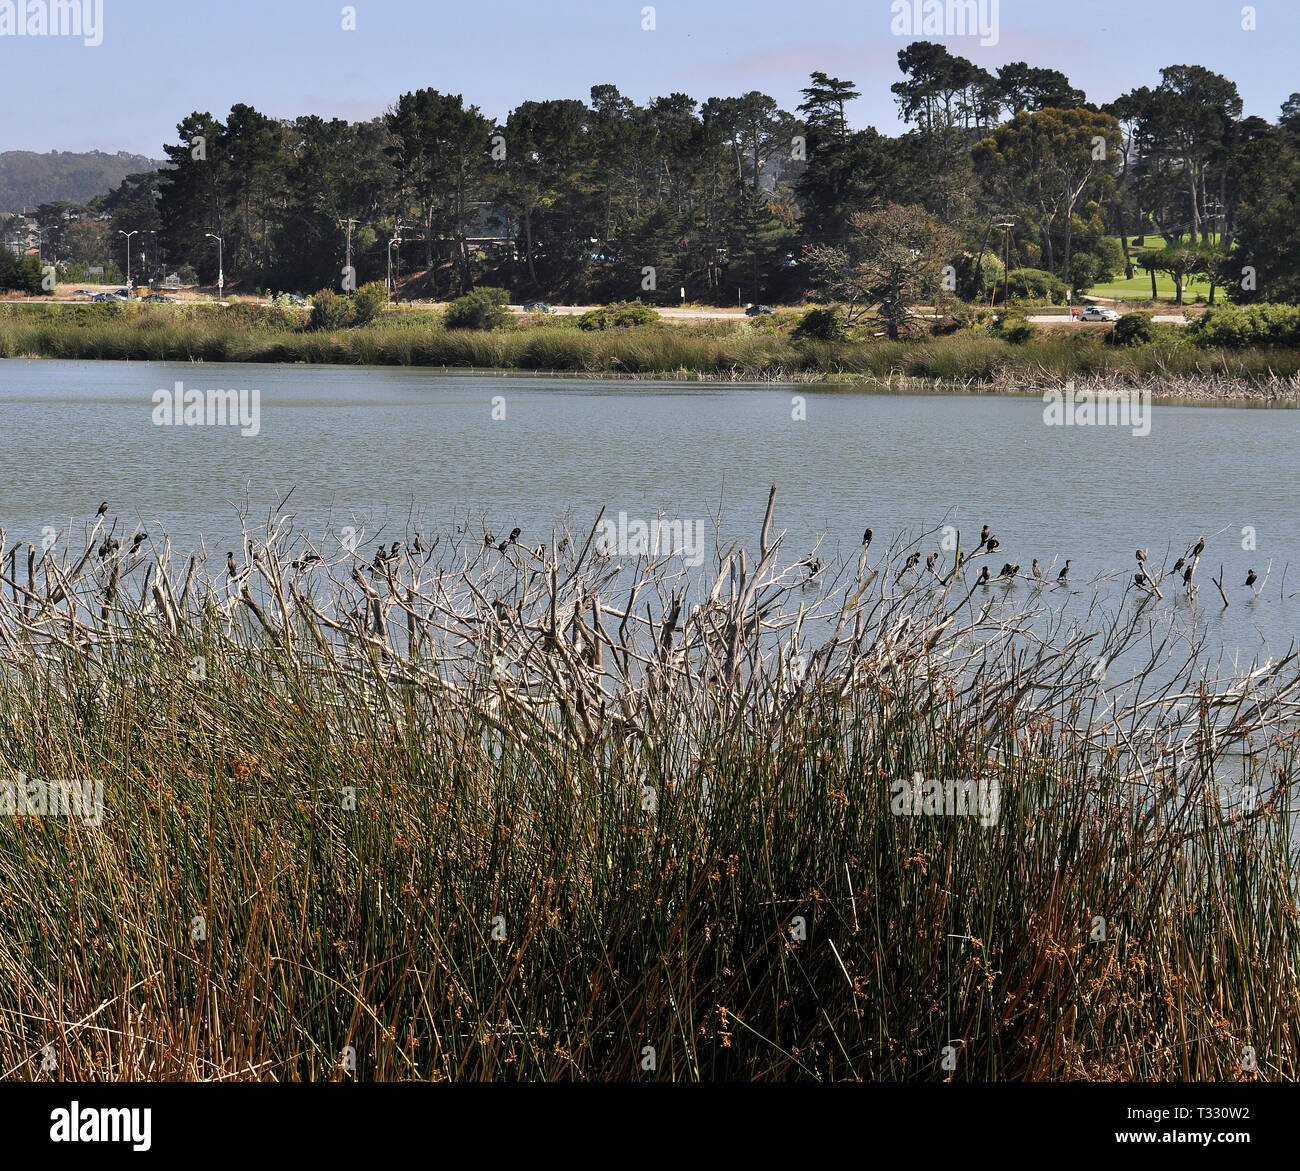 cormorants on partially submerged trees in Lake Merced in San Francisco, California Stock Photo